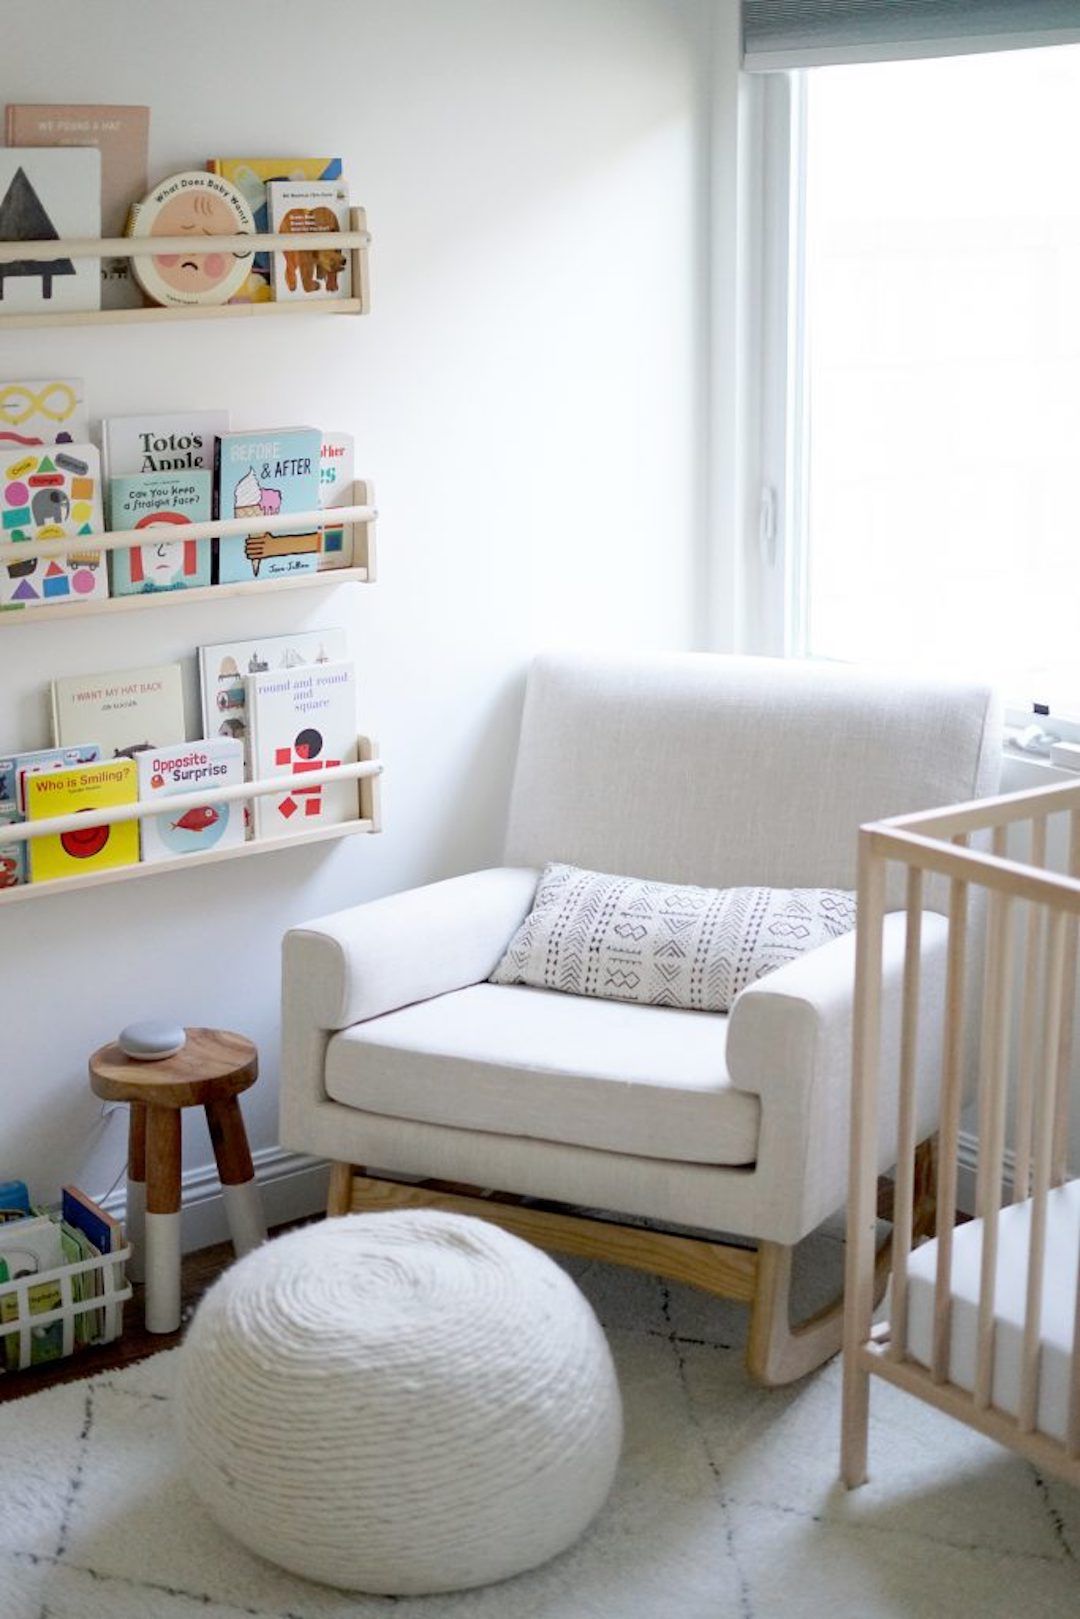 Relax in Comfort with Nursing Chairs: Functional and Stylish Seating Options for New Moms